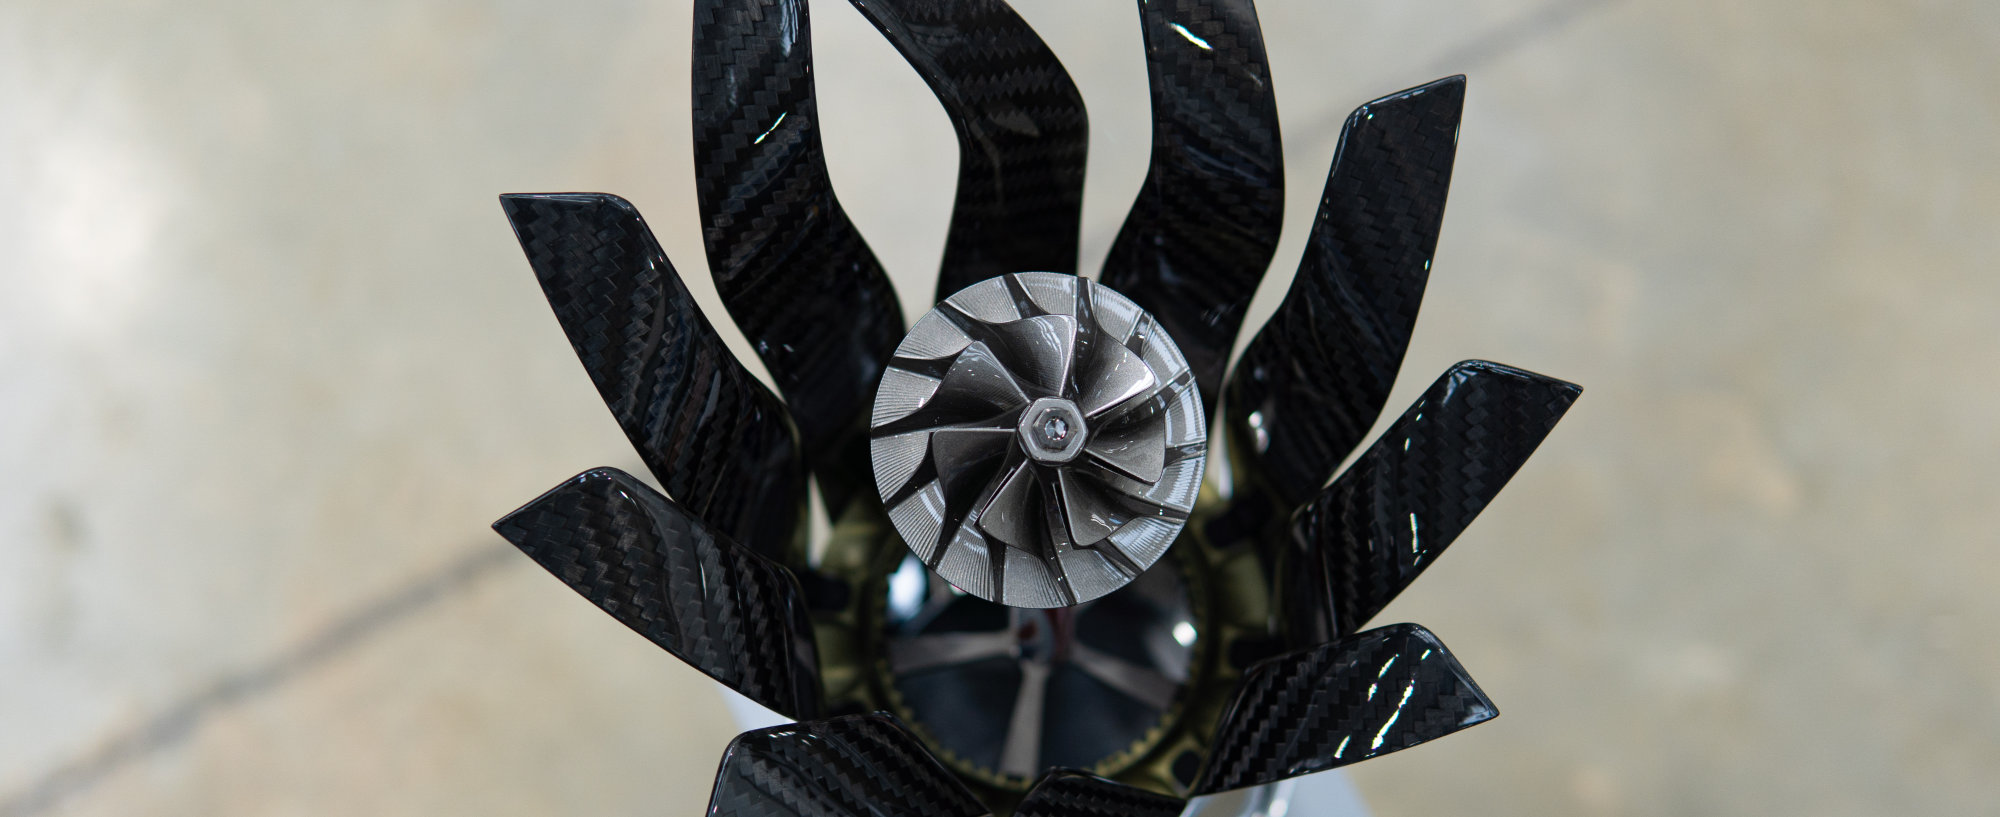 The turbocharger impeller within the Constructors’ trophy, in graphite colour. The first place trophy has a gold colour, second place silver, and third place bronze. 